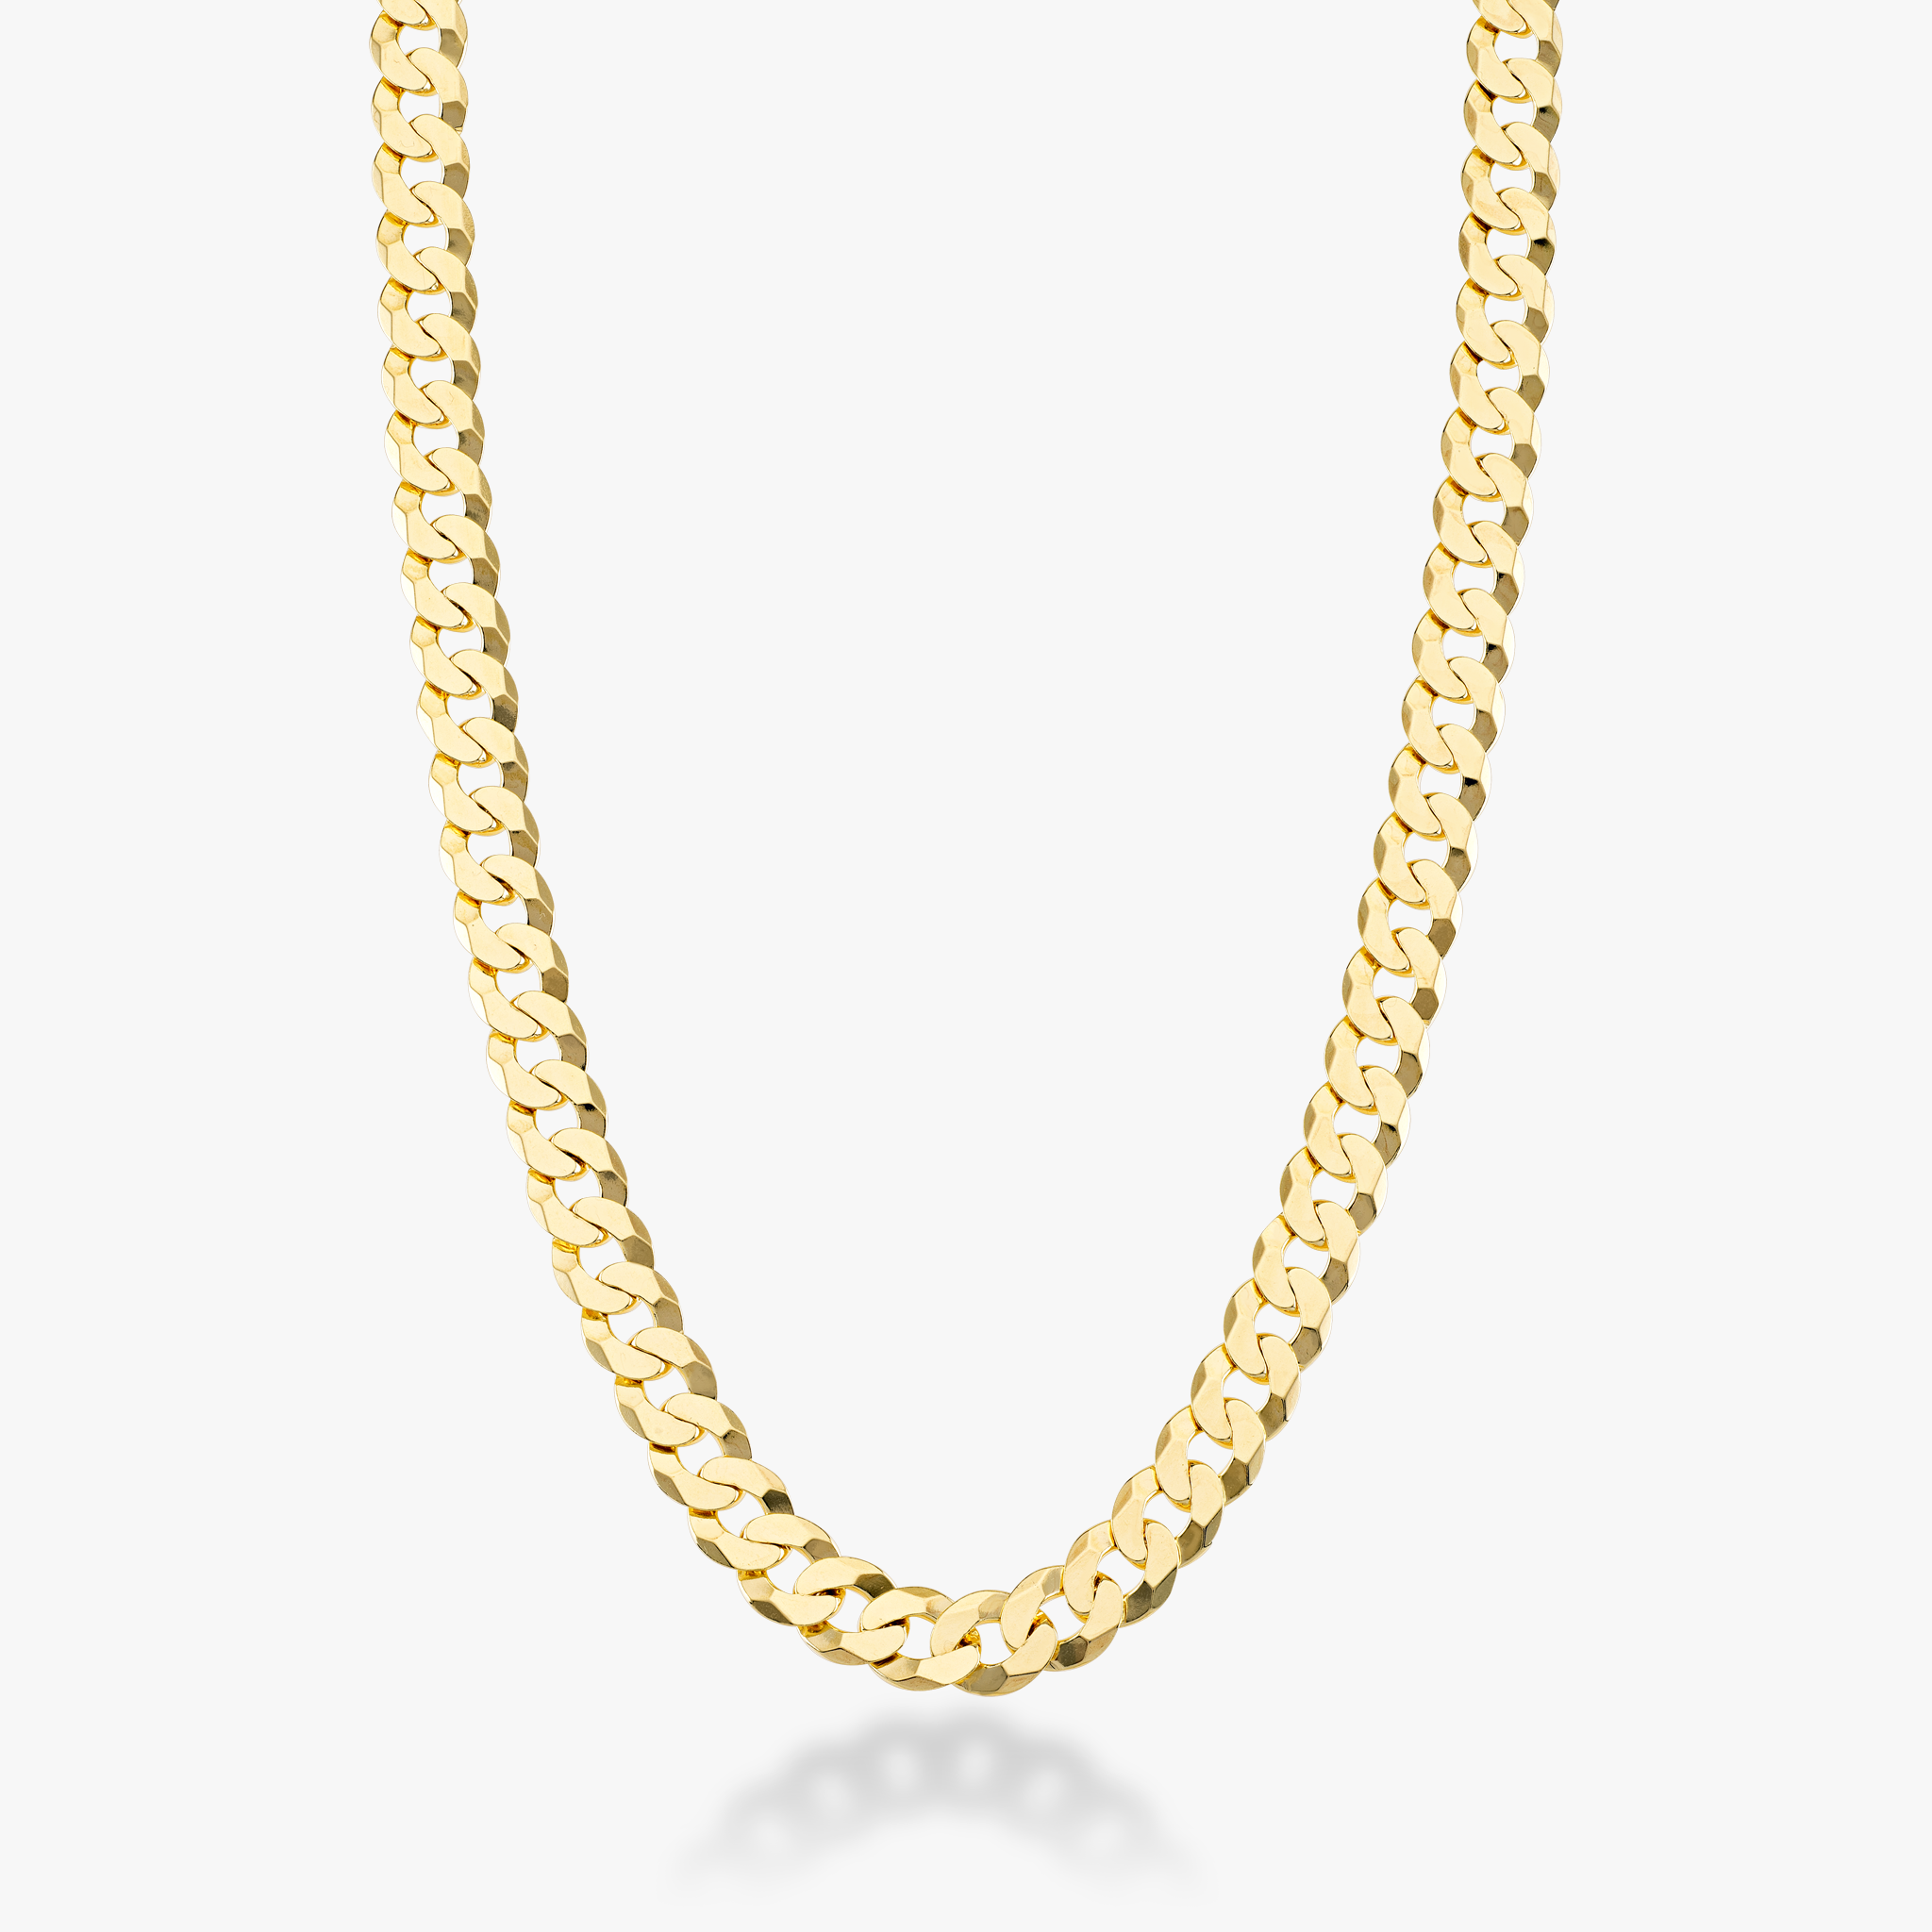 Cuban Chain Necklace in 18k gold over sterling silver, 7mm – Miabella